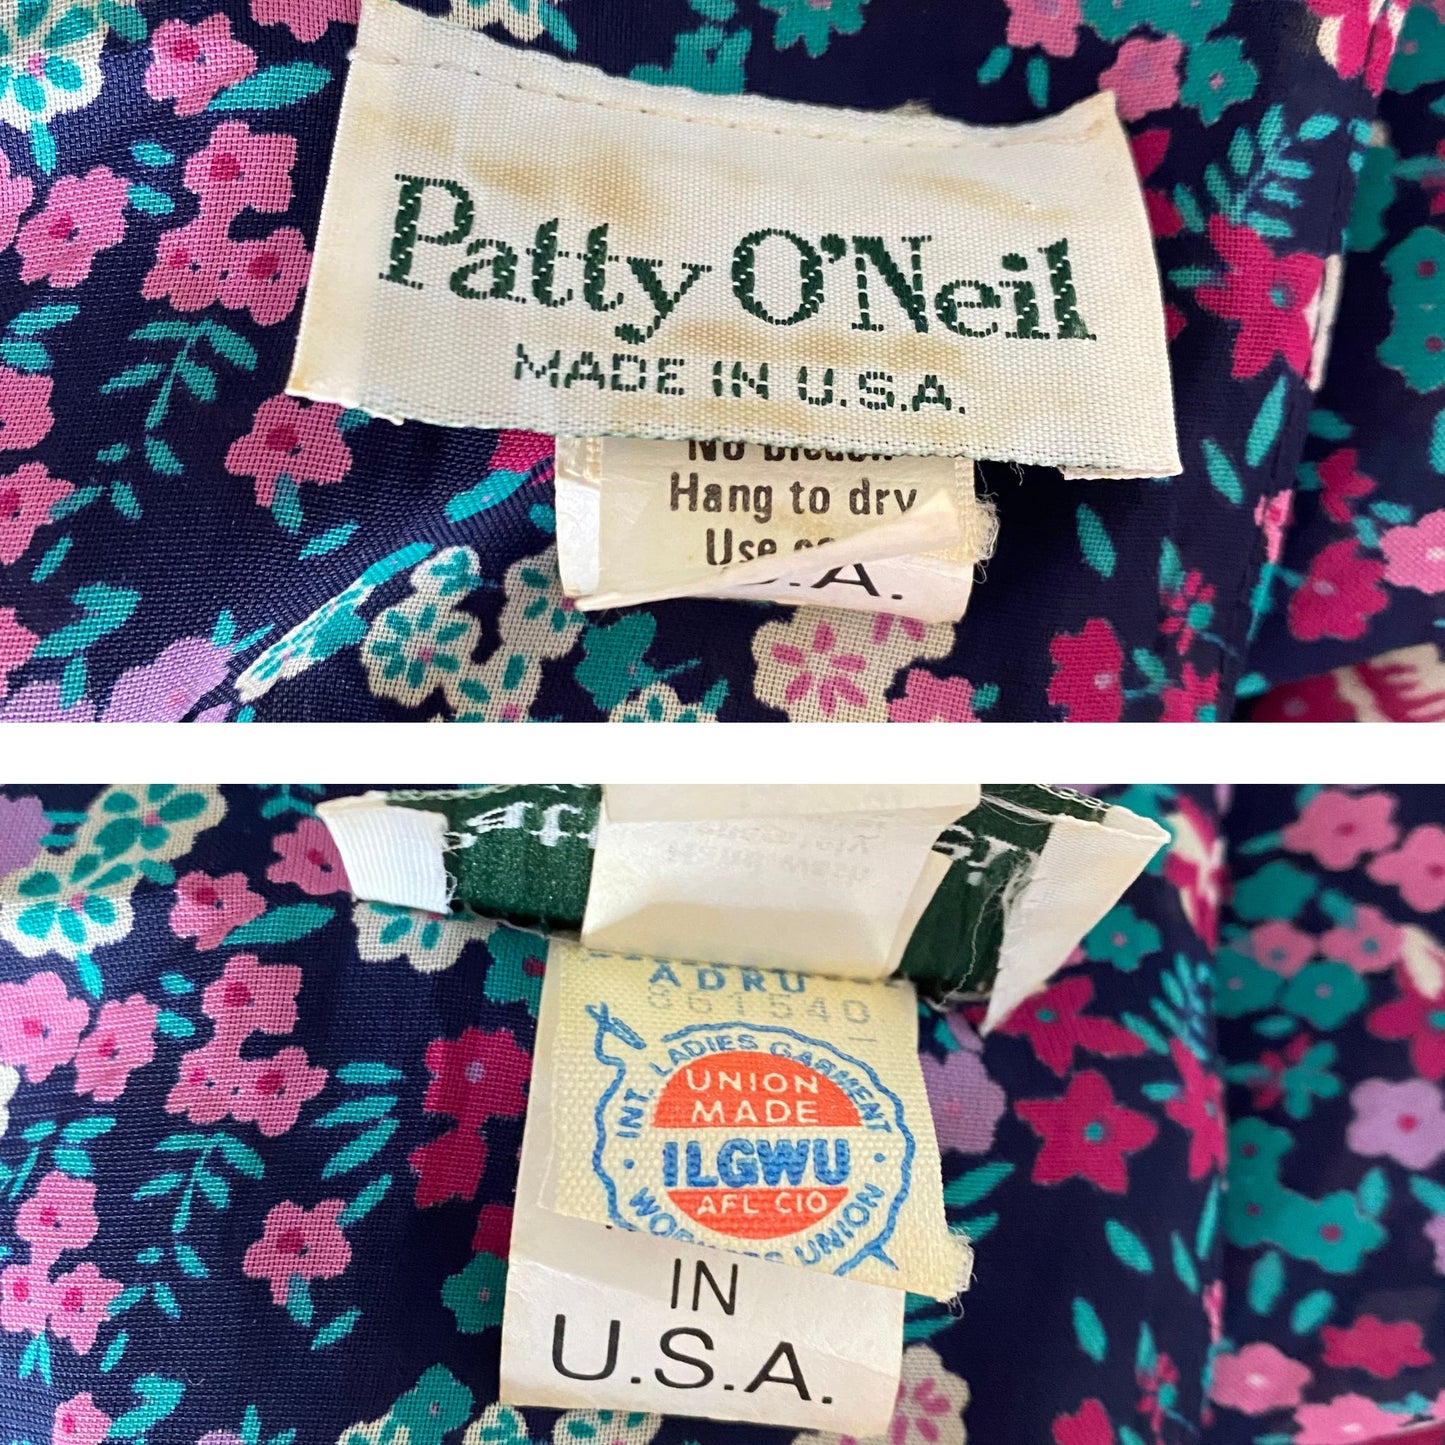 Vintage 80s Floral Blouson Tea Dress - Made in USA, Patty O'Neil. Approx UK size 14-16